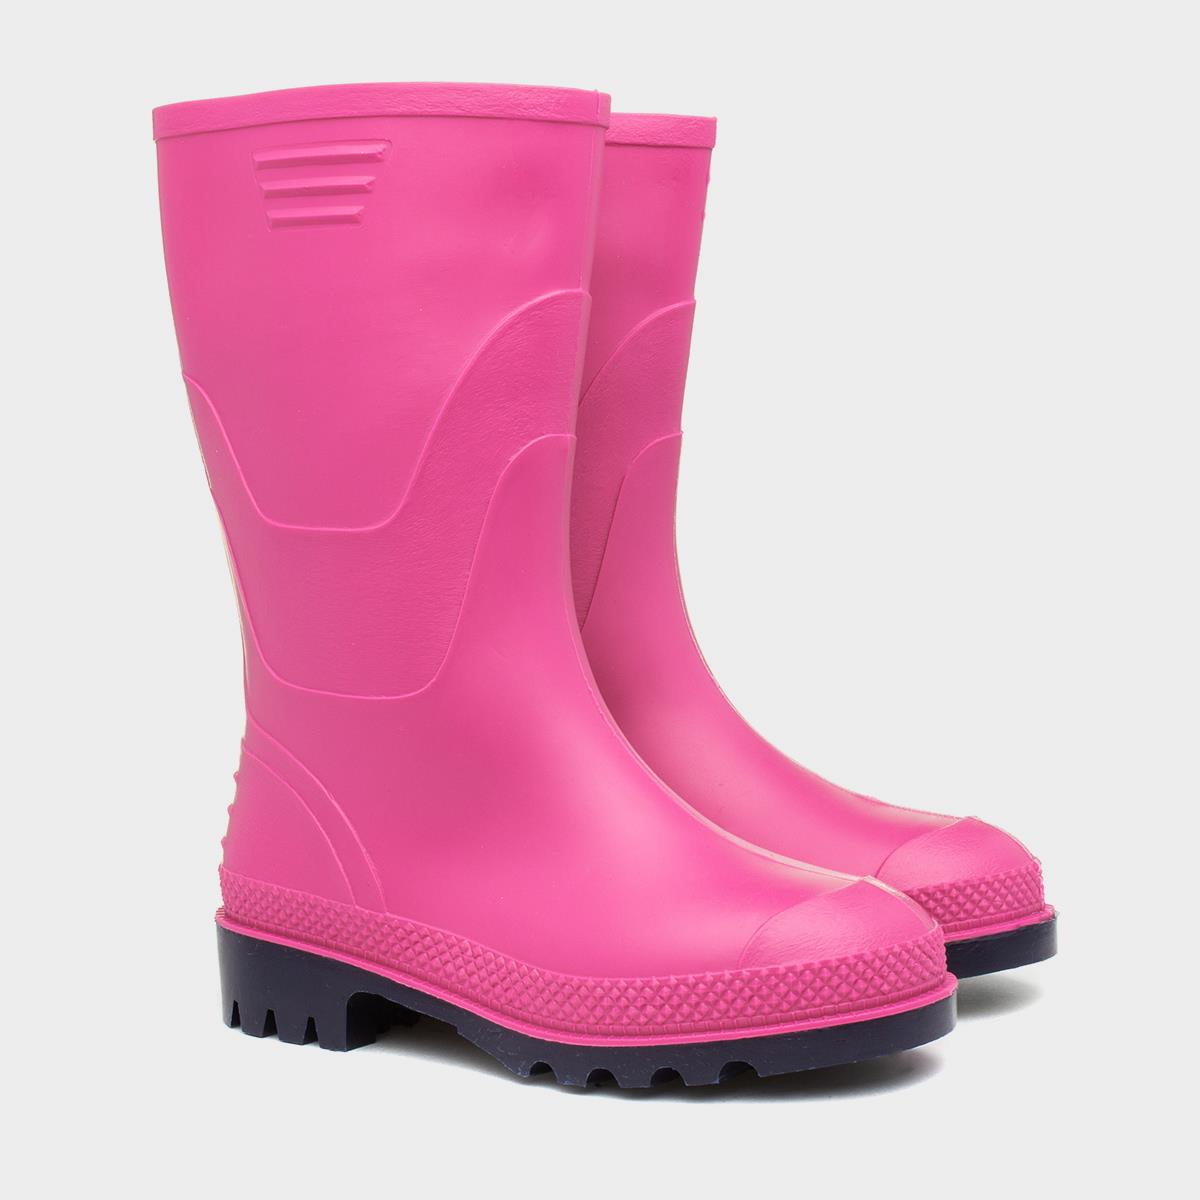 pink wellies size 5